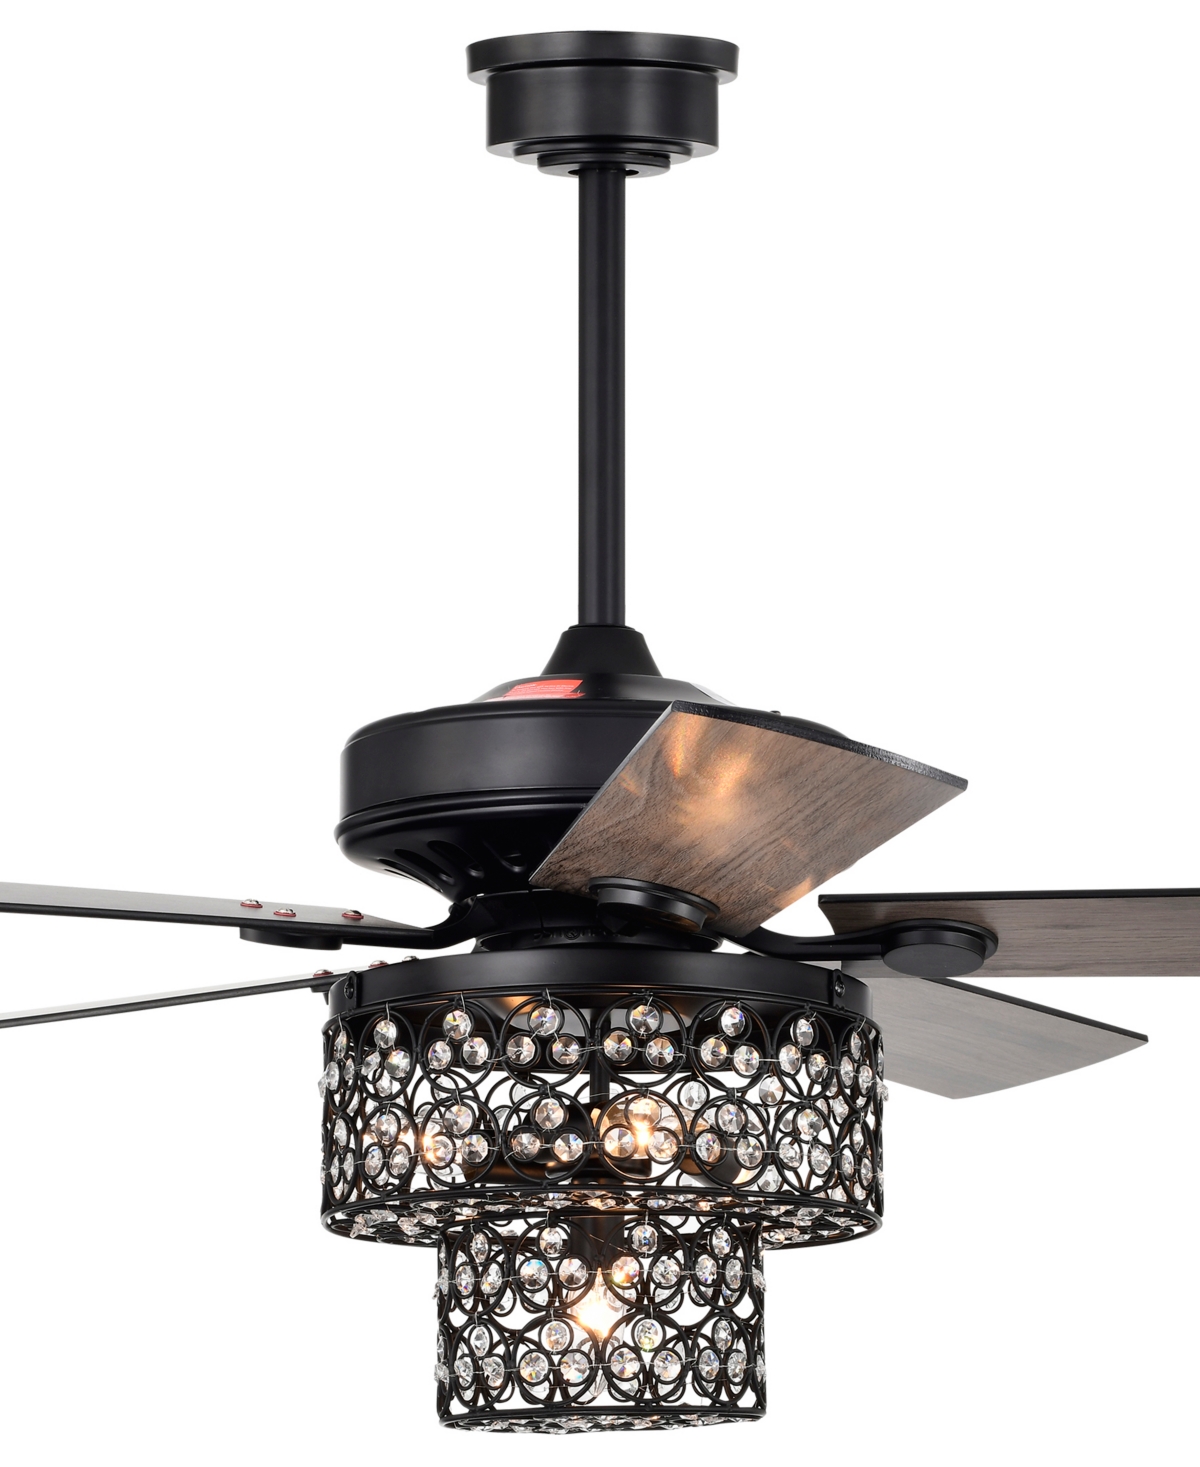 Home Accessories Hasna 52" 4-light Indoor Ceiling Fan With Light Kit And Remote In Matte Black